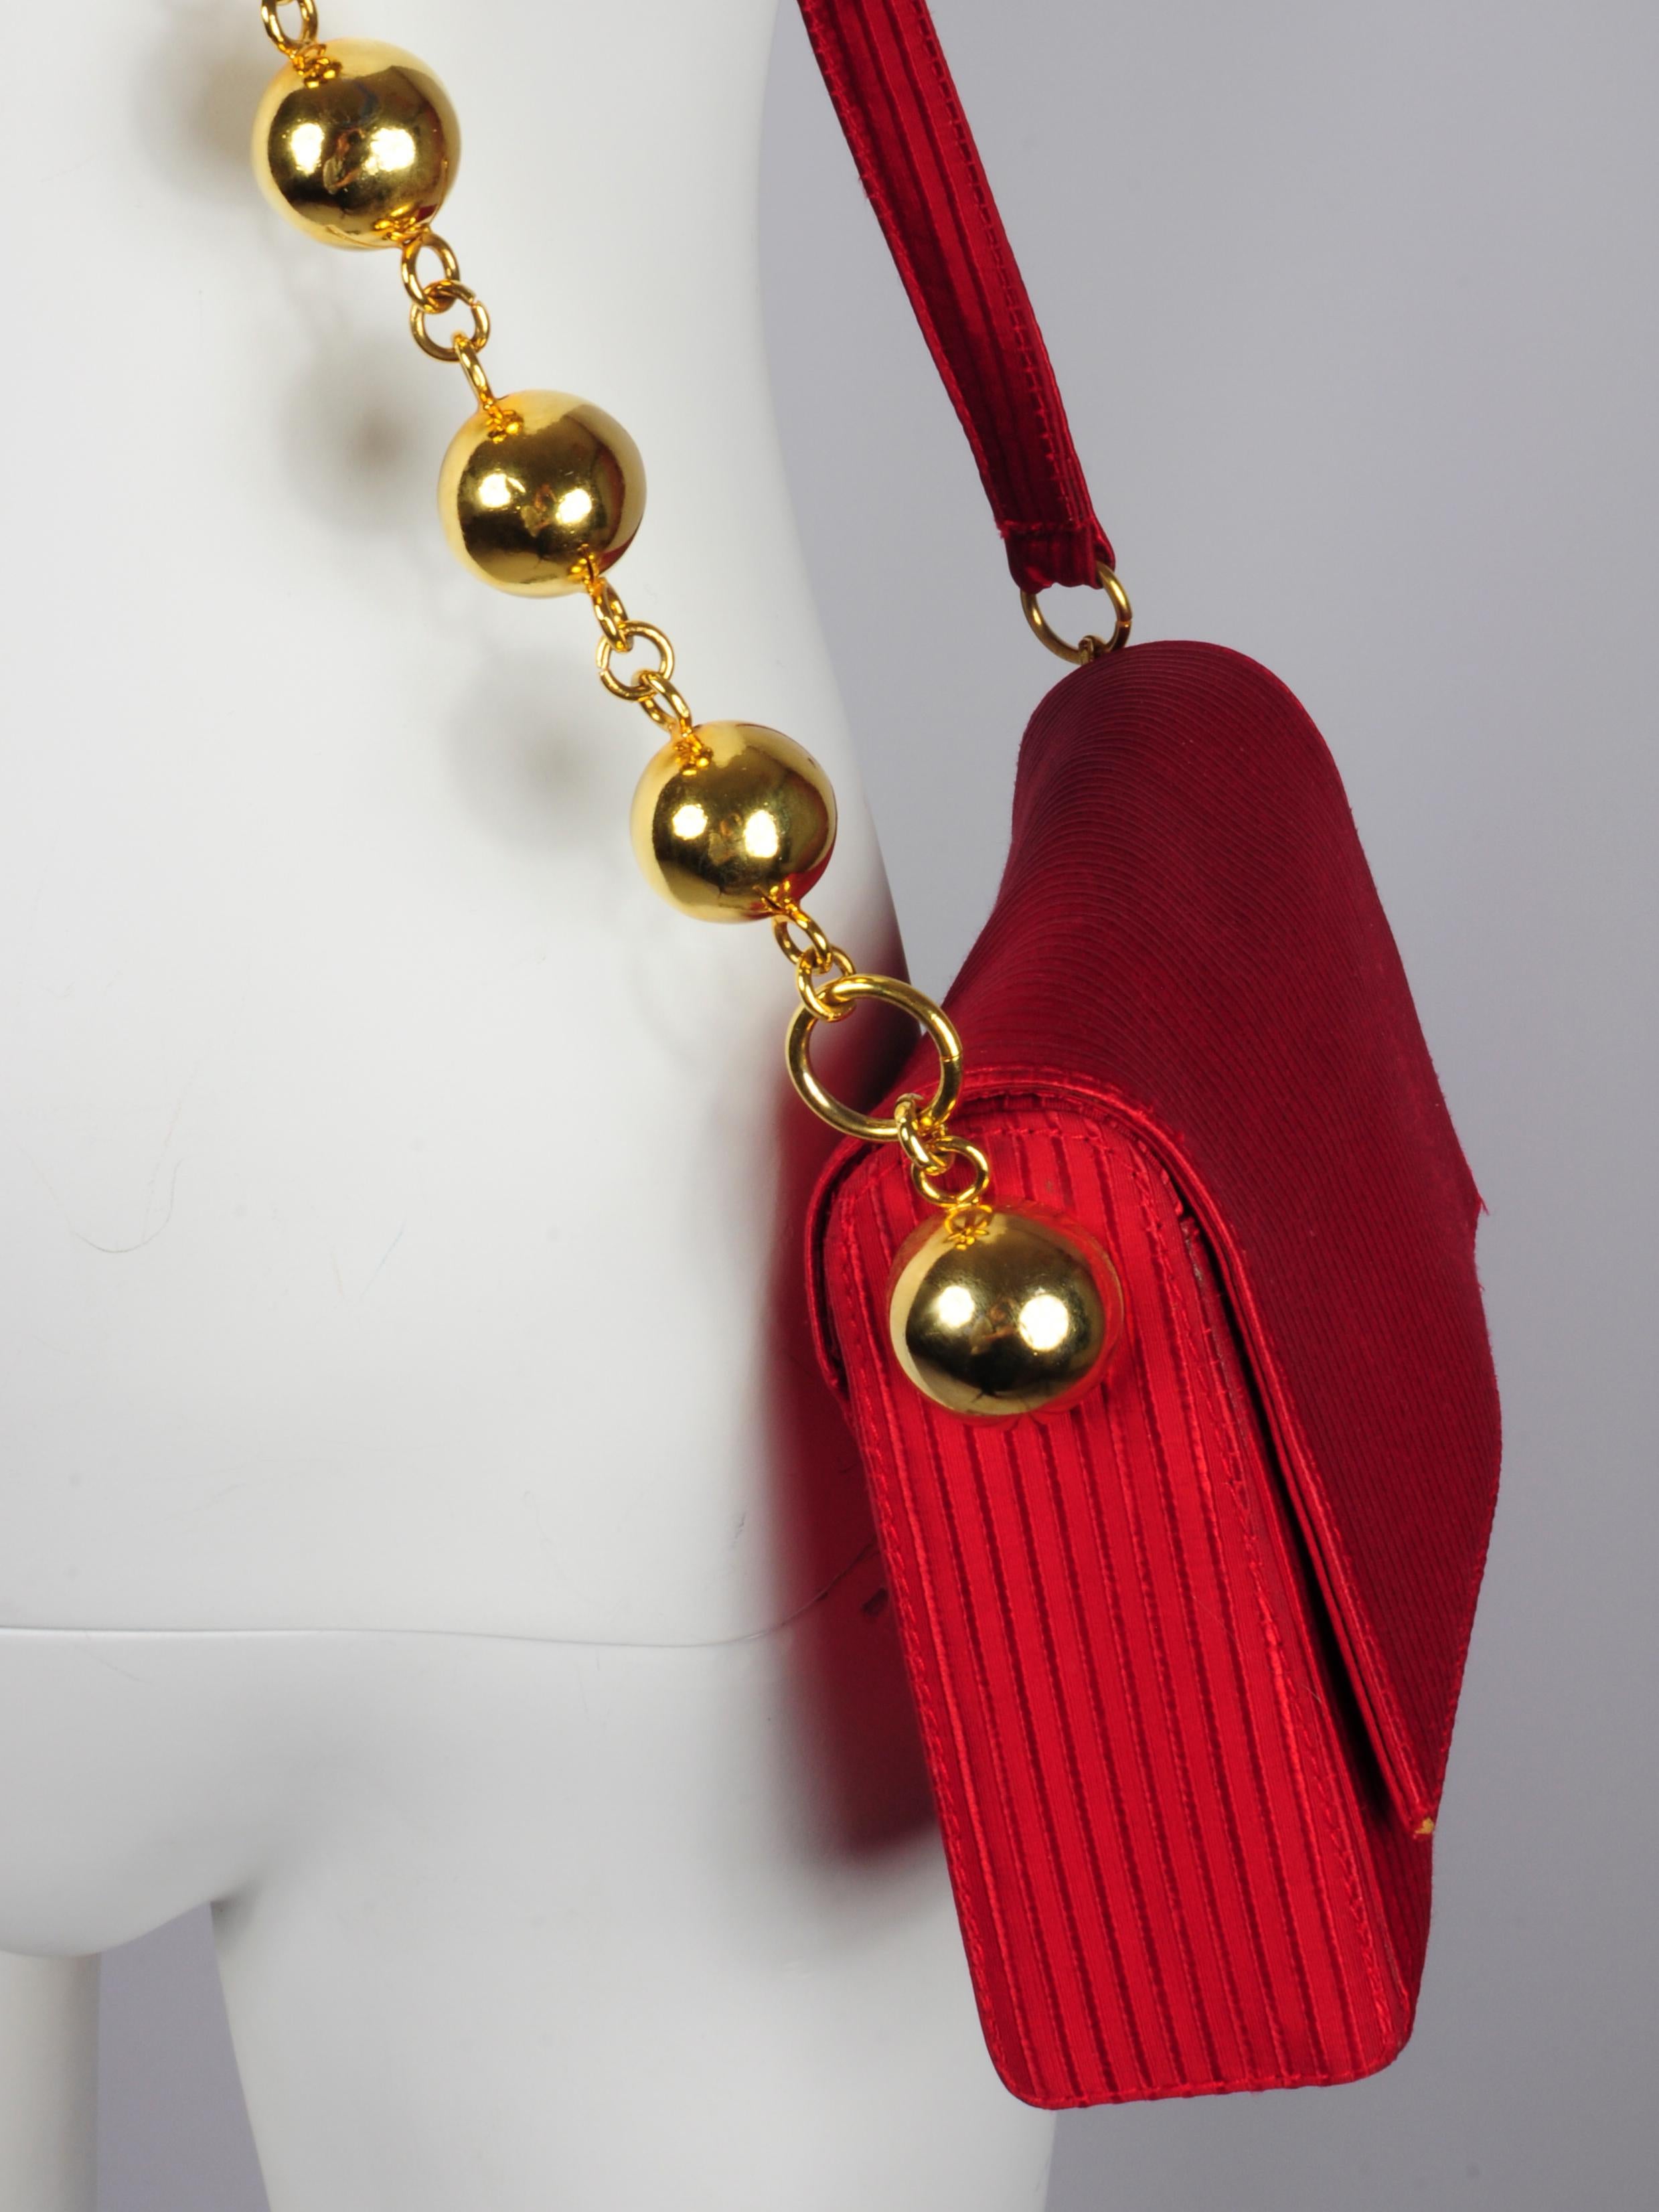 Gianni Versace Couture Crossbody Bag Gold Sphere Handle Chain Strap 1980s For Sale 5